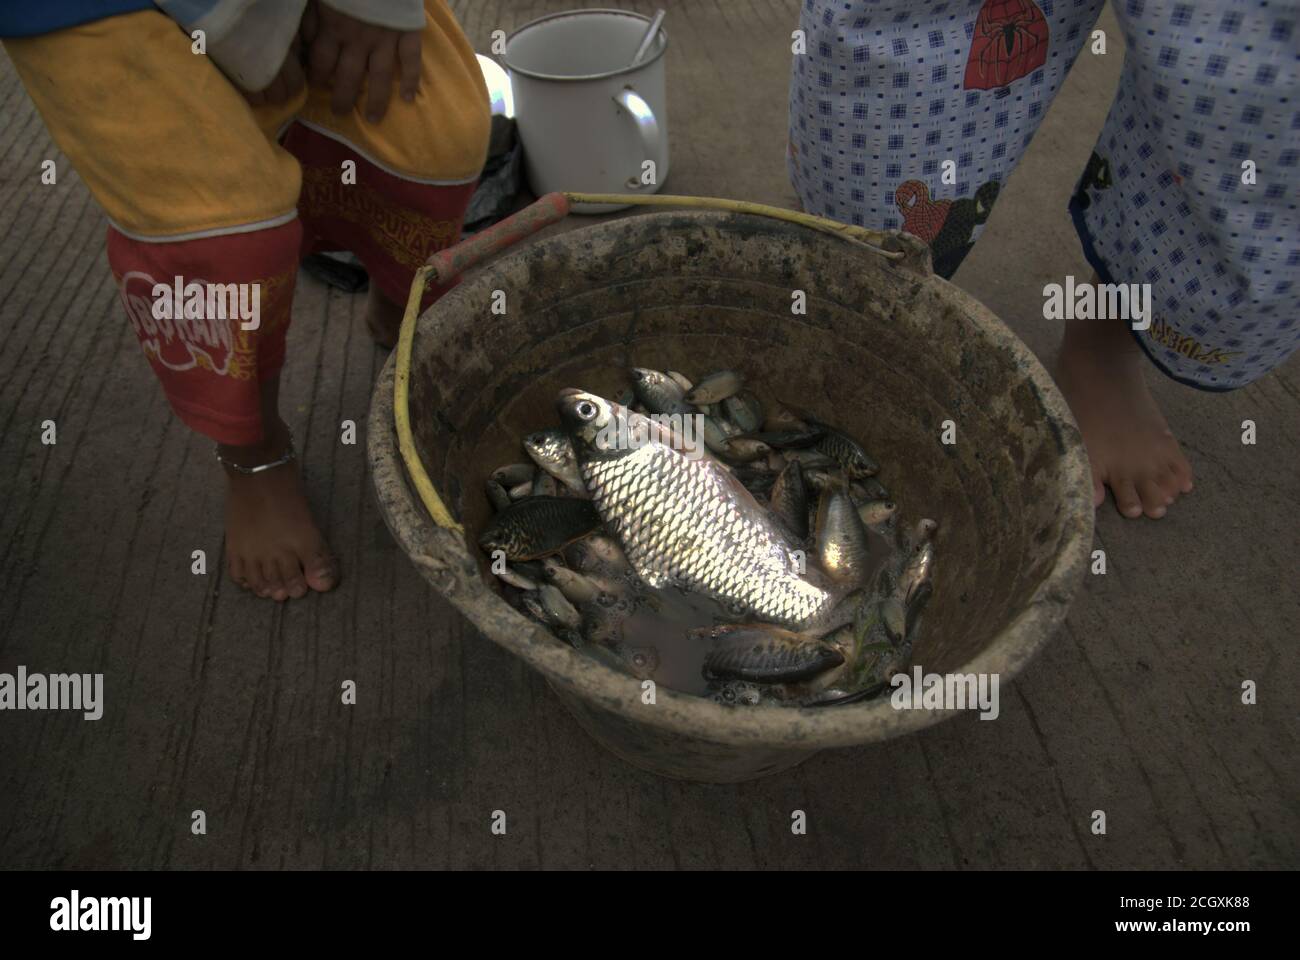 Freshwater fishes caught with pushnets from a flooded rice field during rainy season in Karawang regency, West Java province, Indonesia. Stock Photo